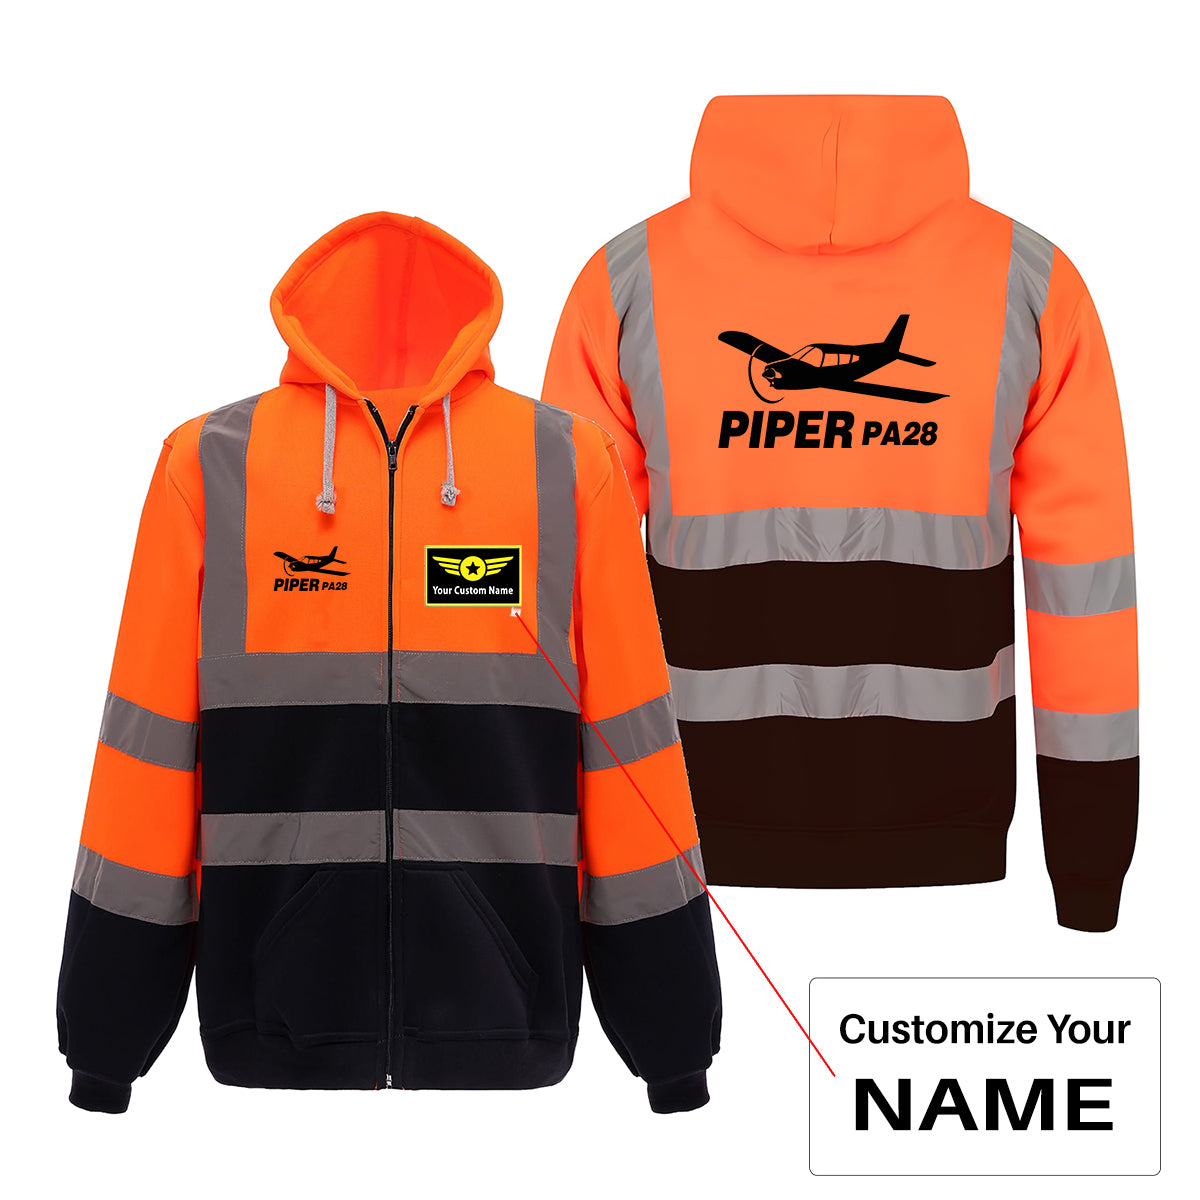 The Piper PA28 Designed Reflective Zipped Hoodies